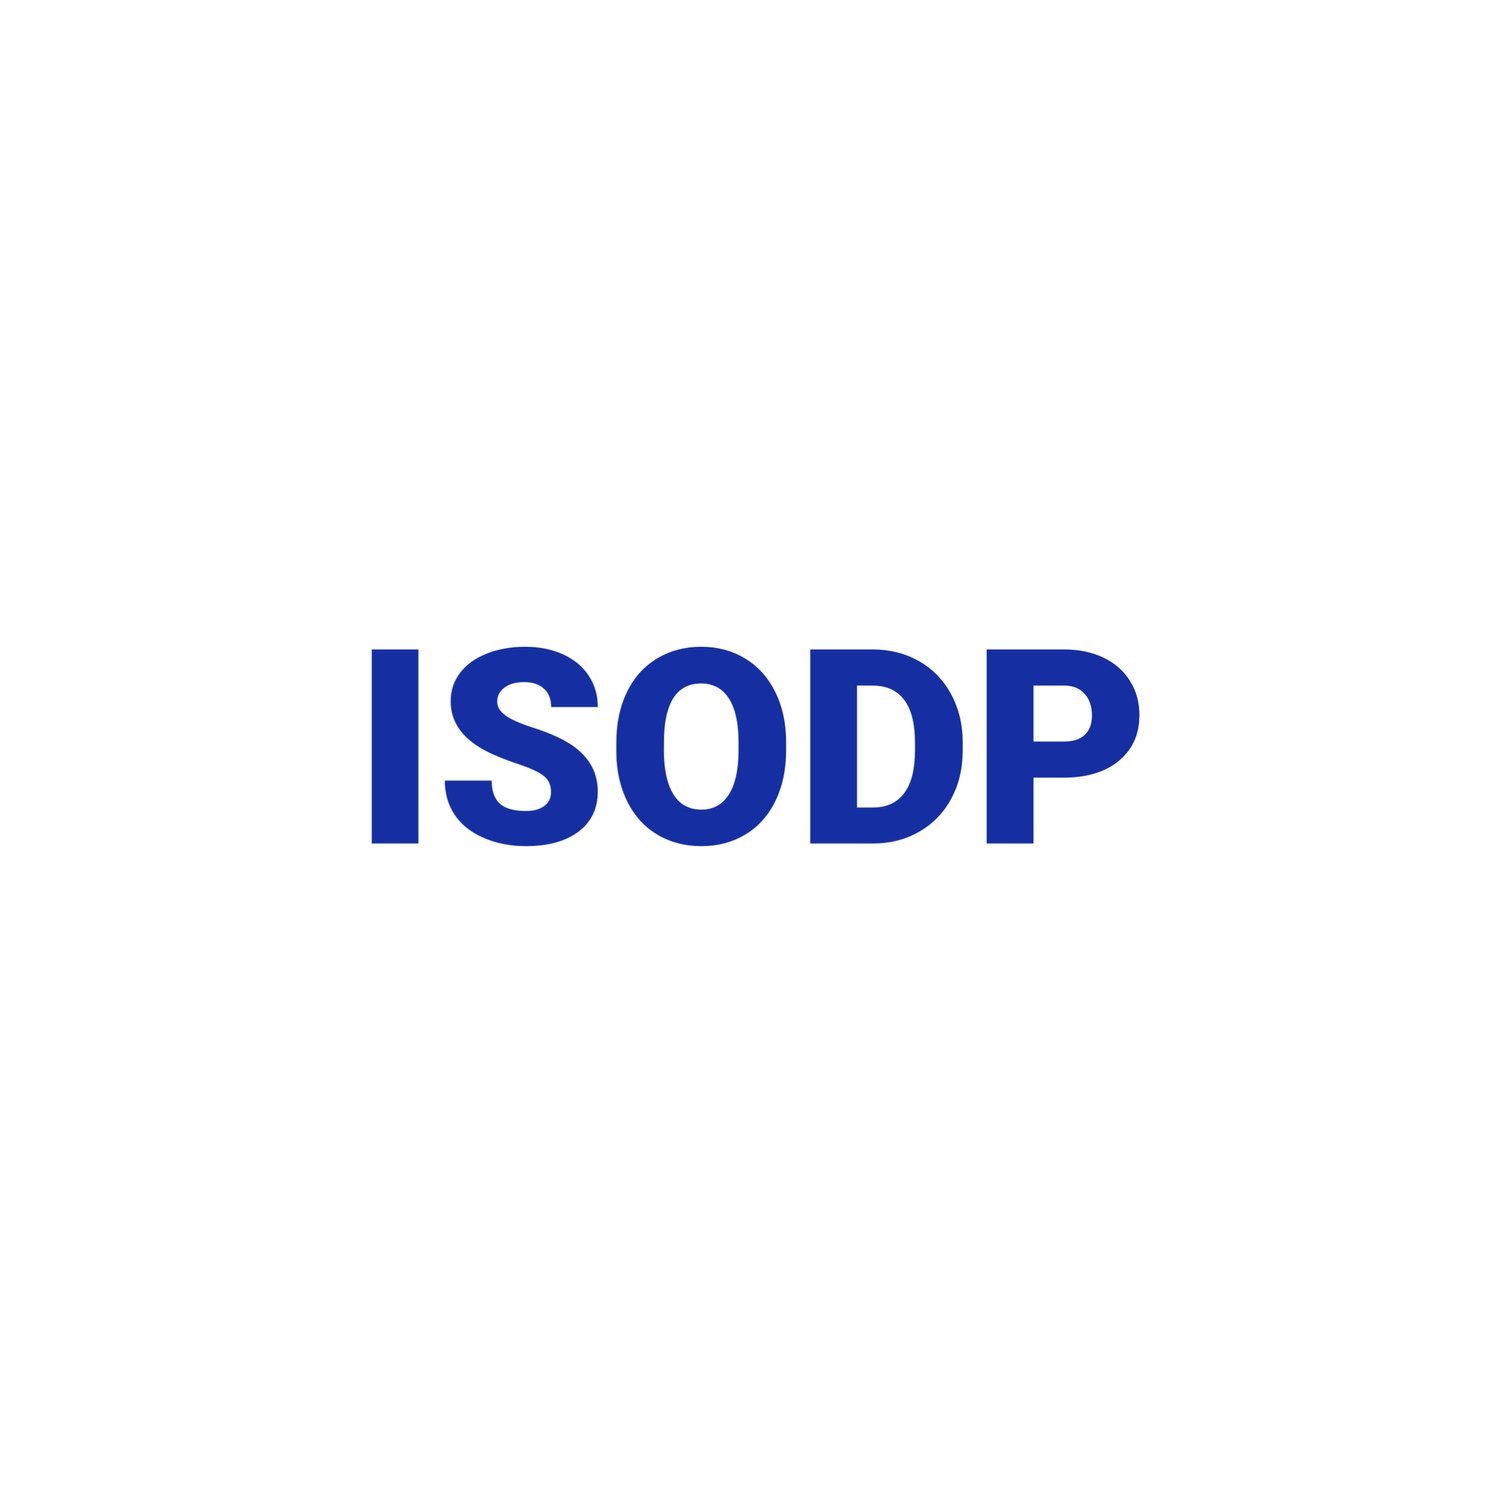 BOOK A ROOM - ISODP 2023